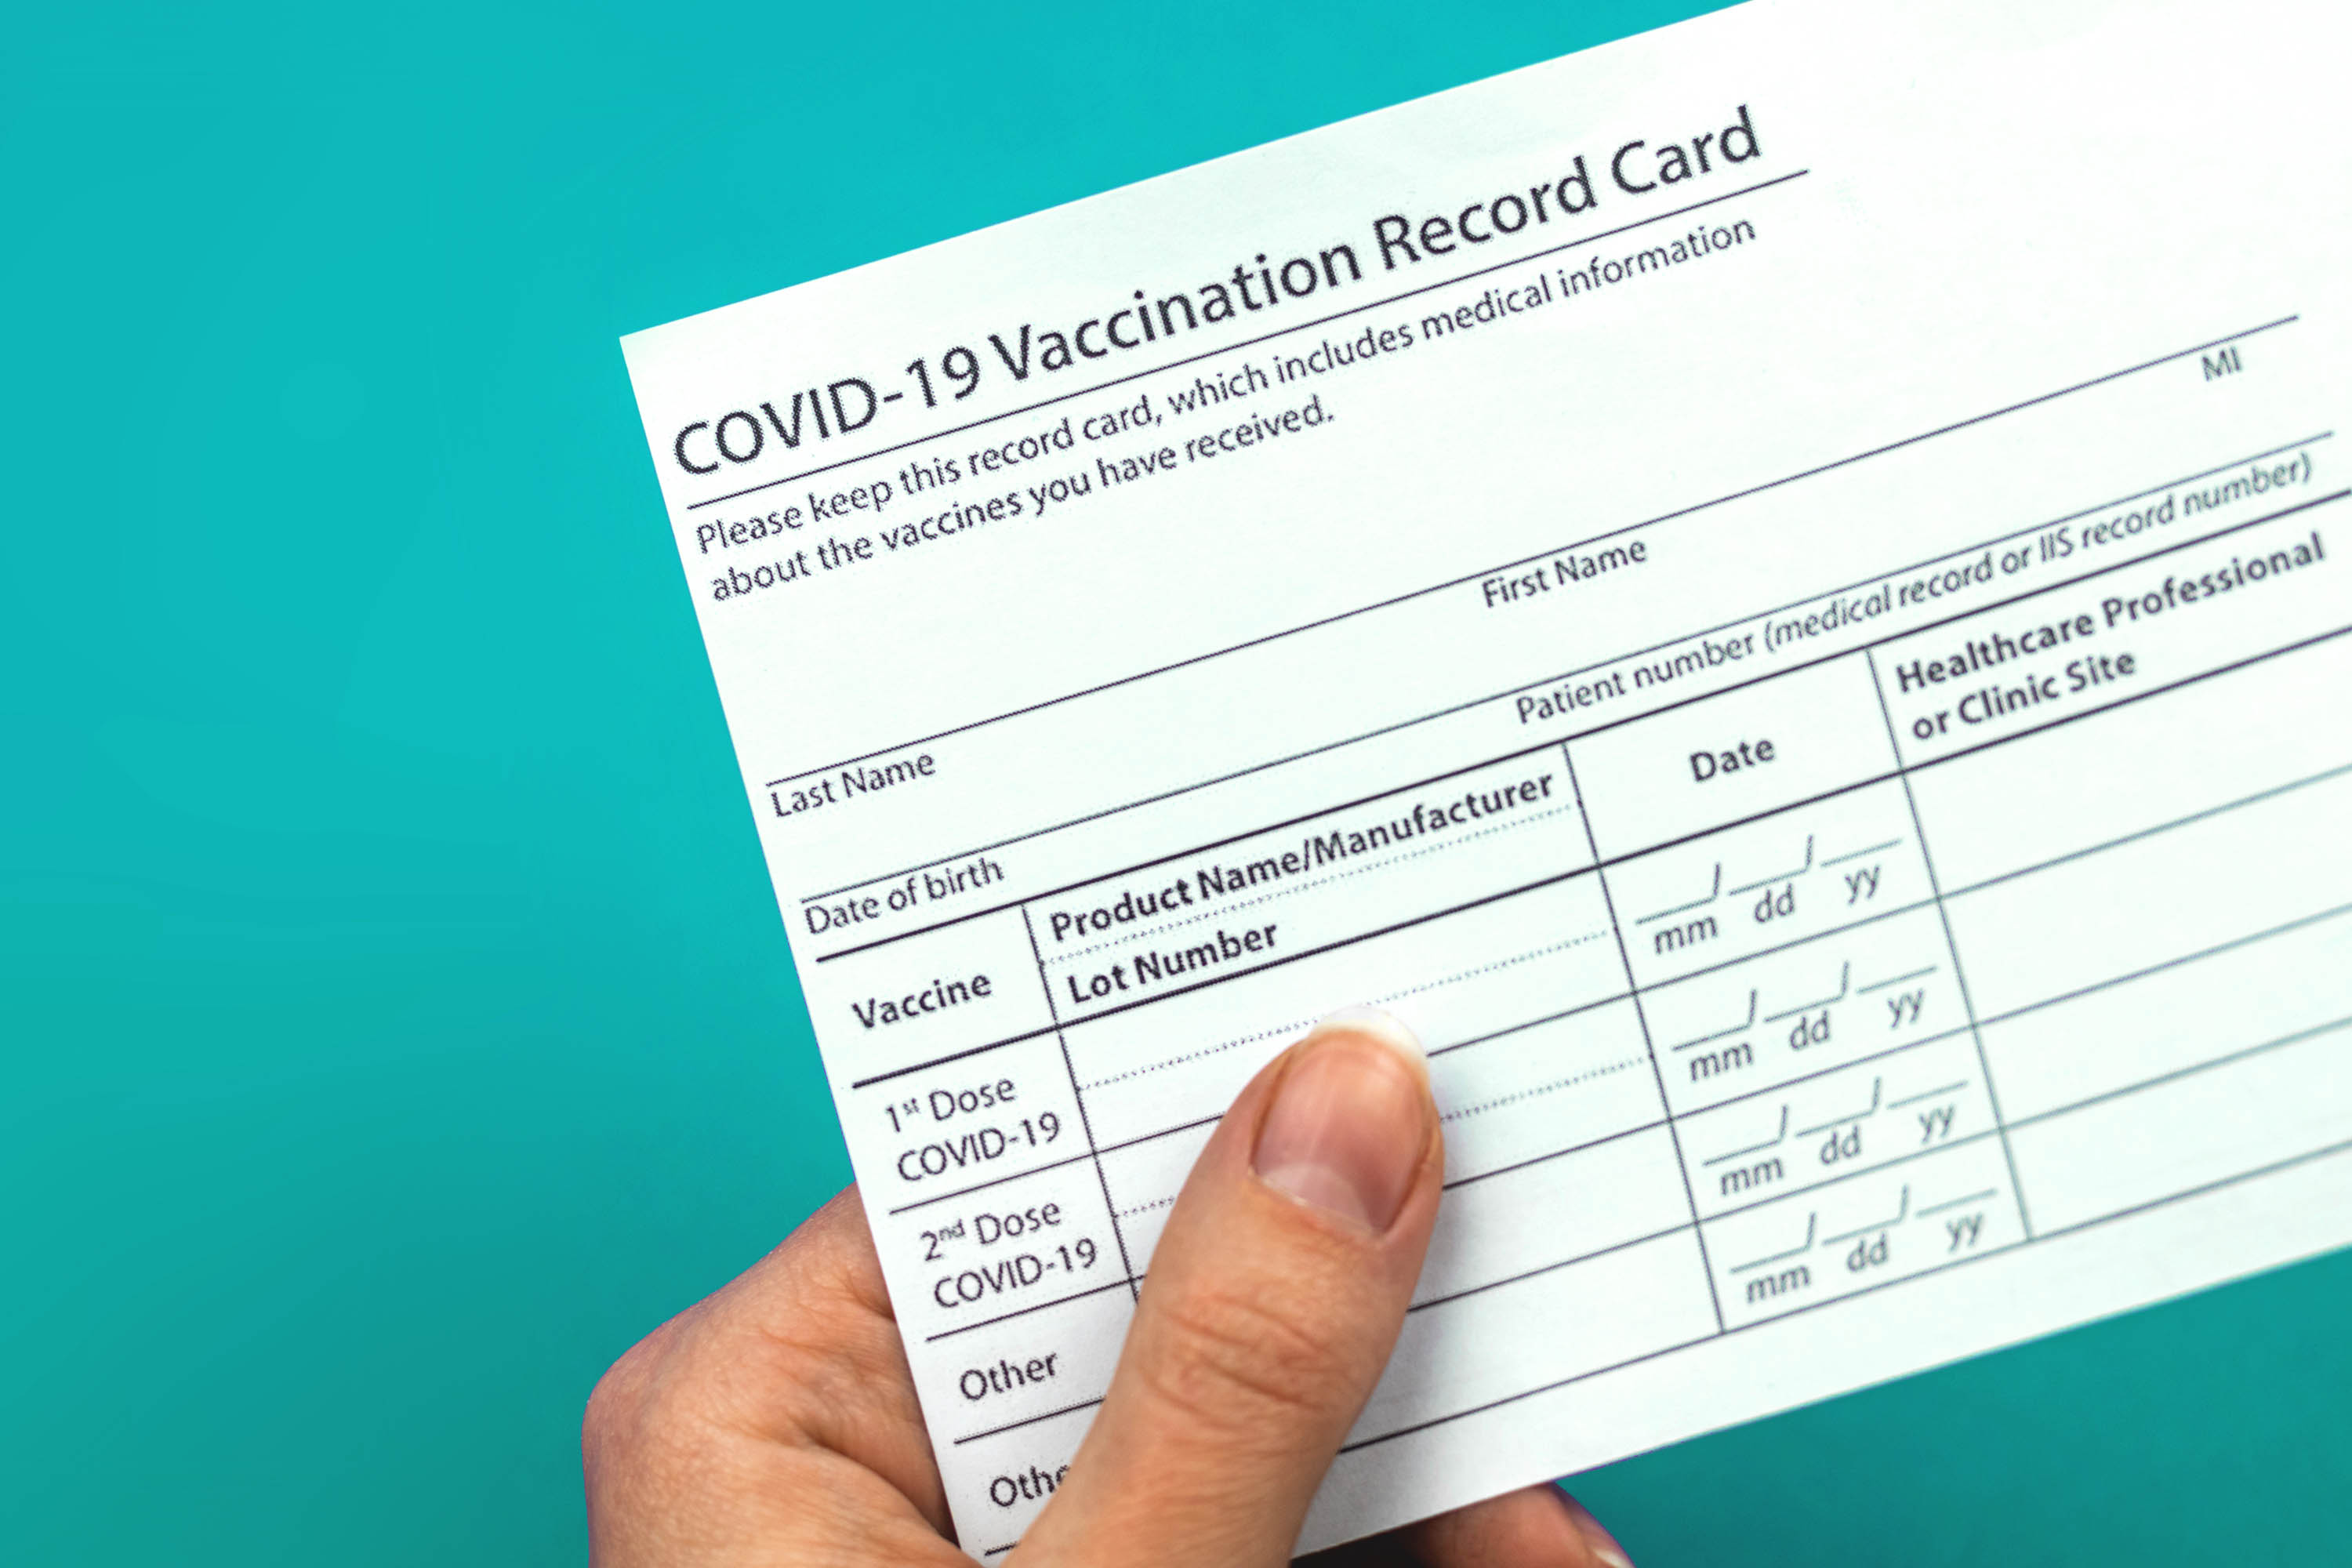 4 key questions about employer-mandated COVID-19 vaccinations